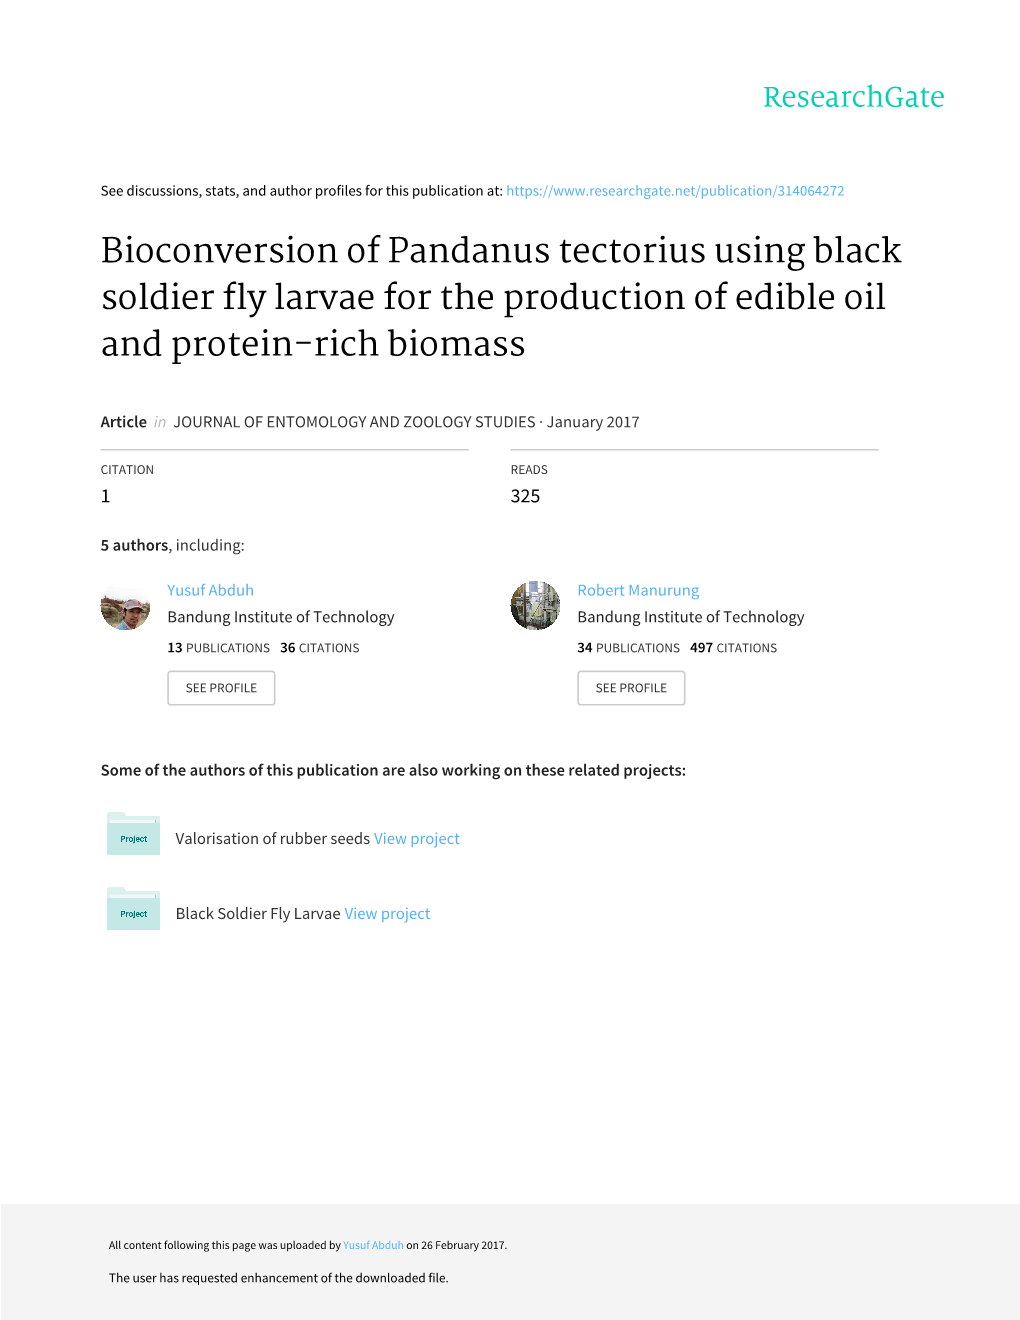 Bioconversion of Pandanus Tectorius Using Black Soldier Fly Larvae for the Production of Edible Oil and Protein-Rich Biomass